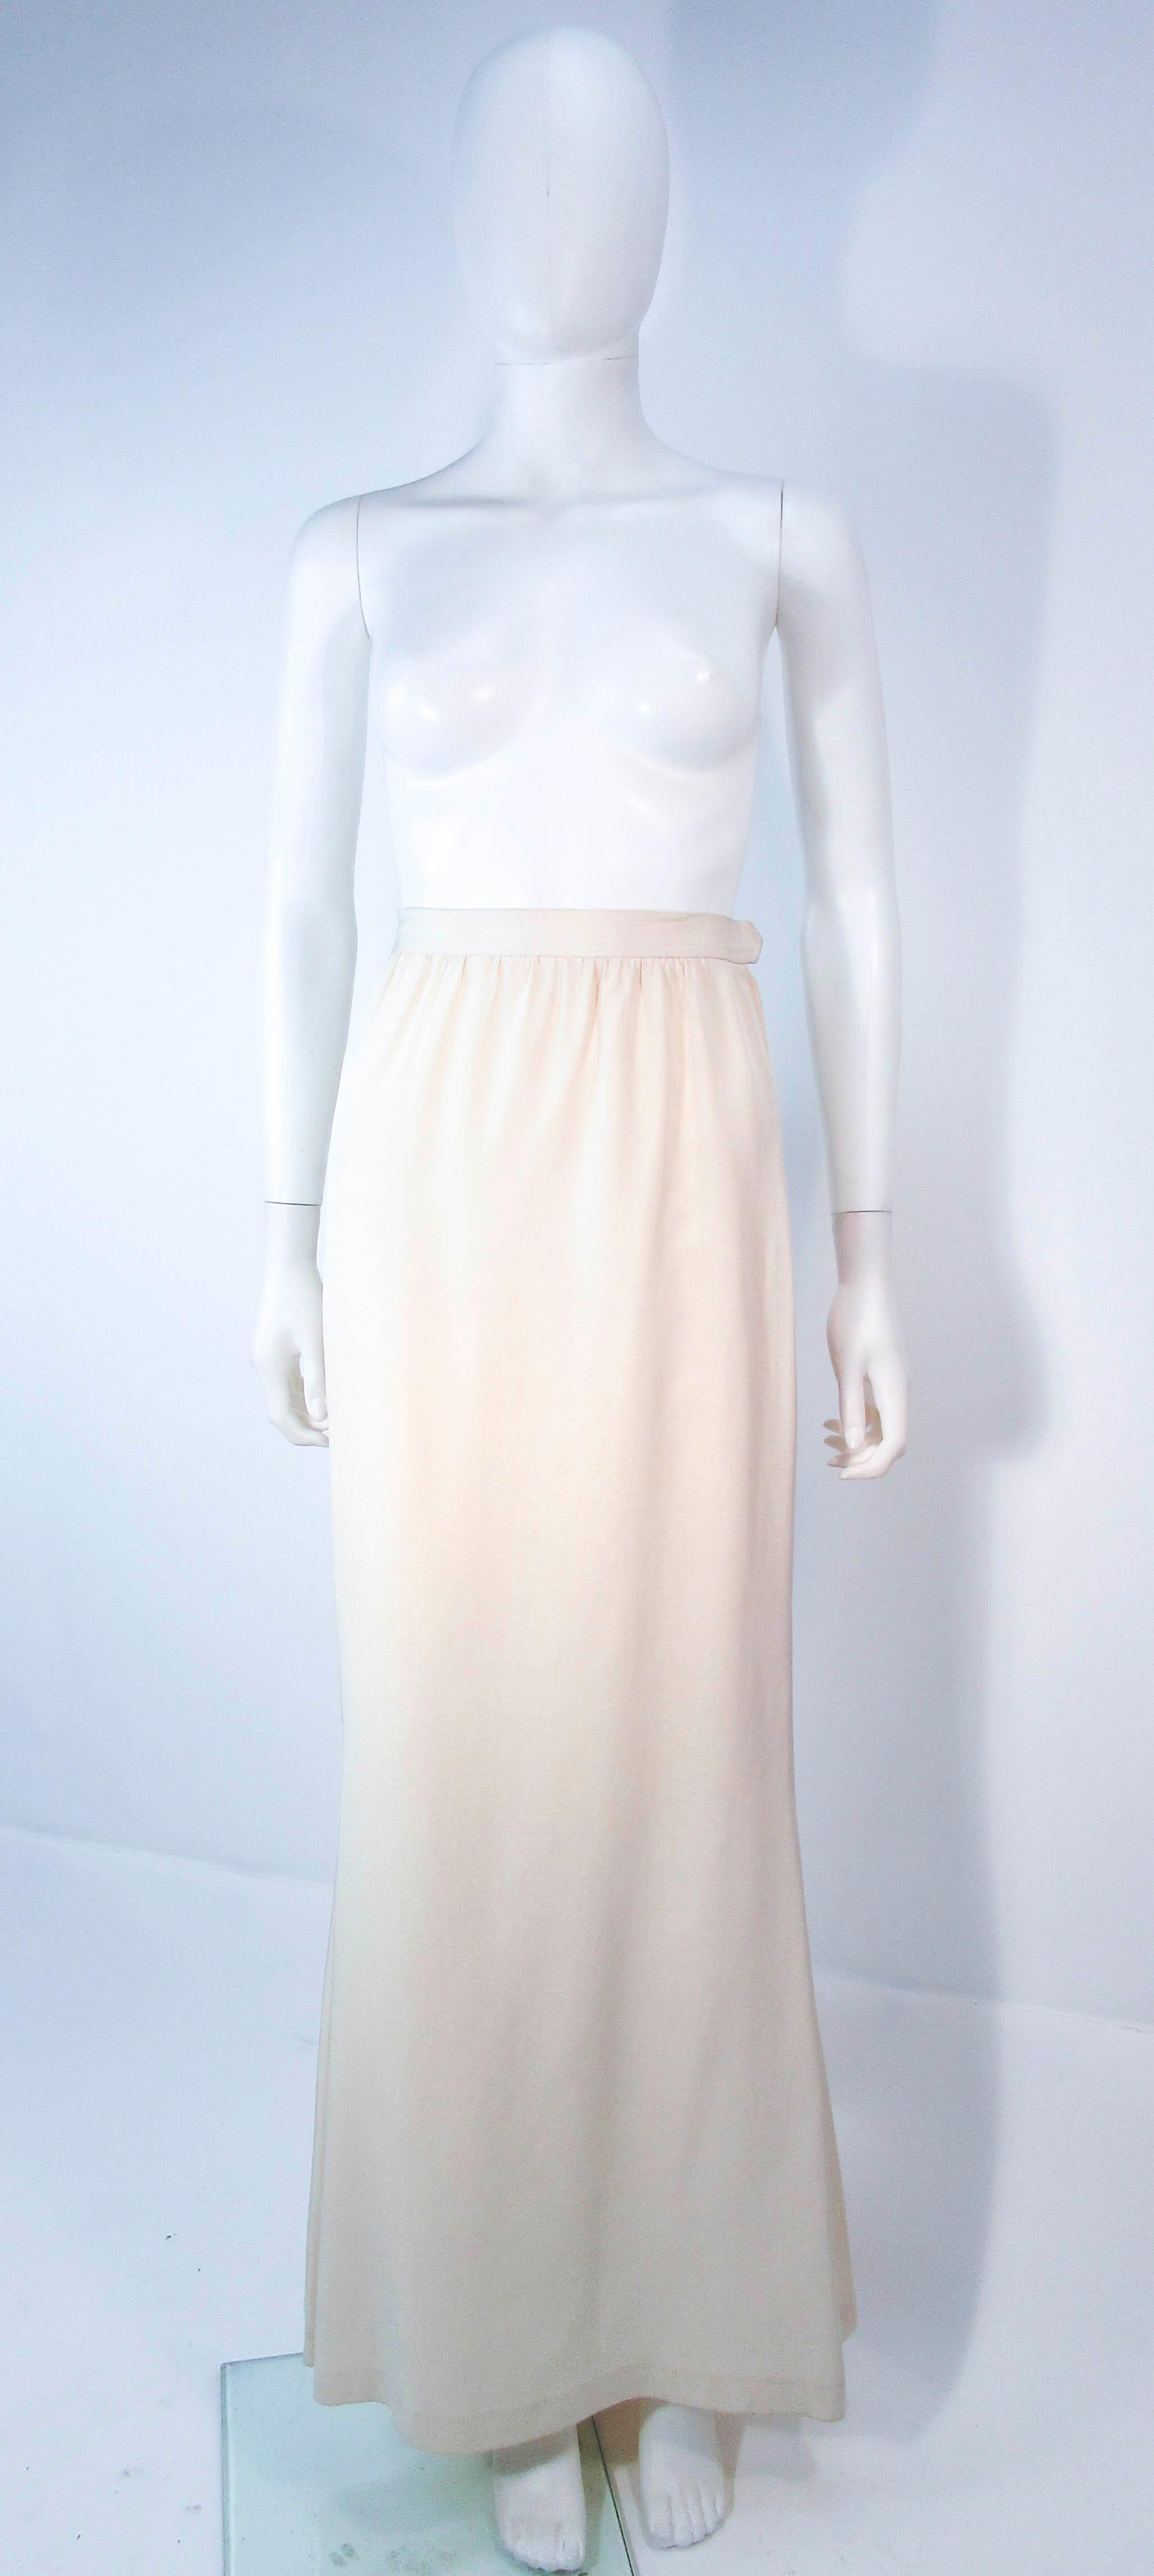 This Yves Saint Laurent skirt is composed of a white silk. Features a mermaid silhouette with zipper closure. In great vintage condition, some signs of wear due to age. 

This YSL skirt is from an extensive collection I acquired from the estate of a